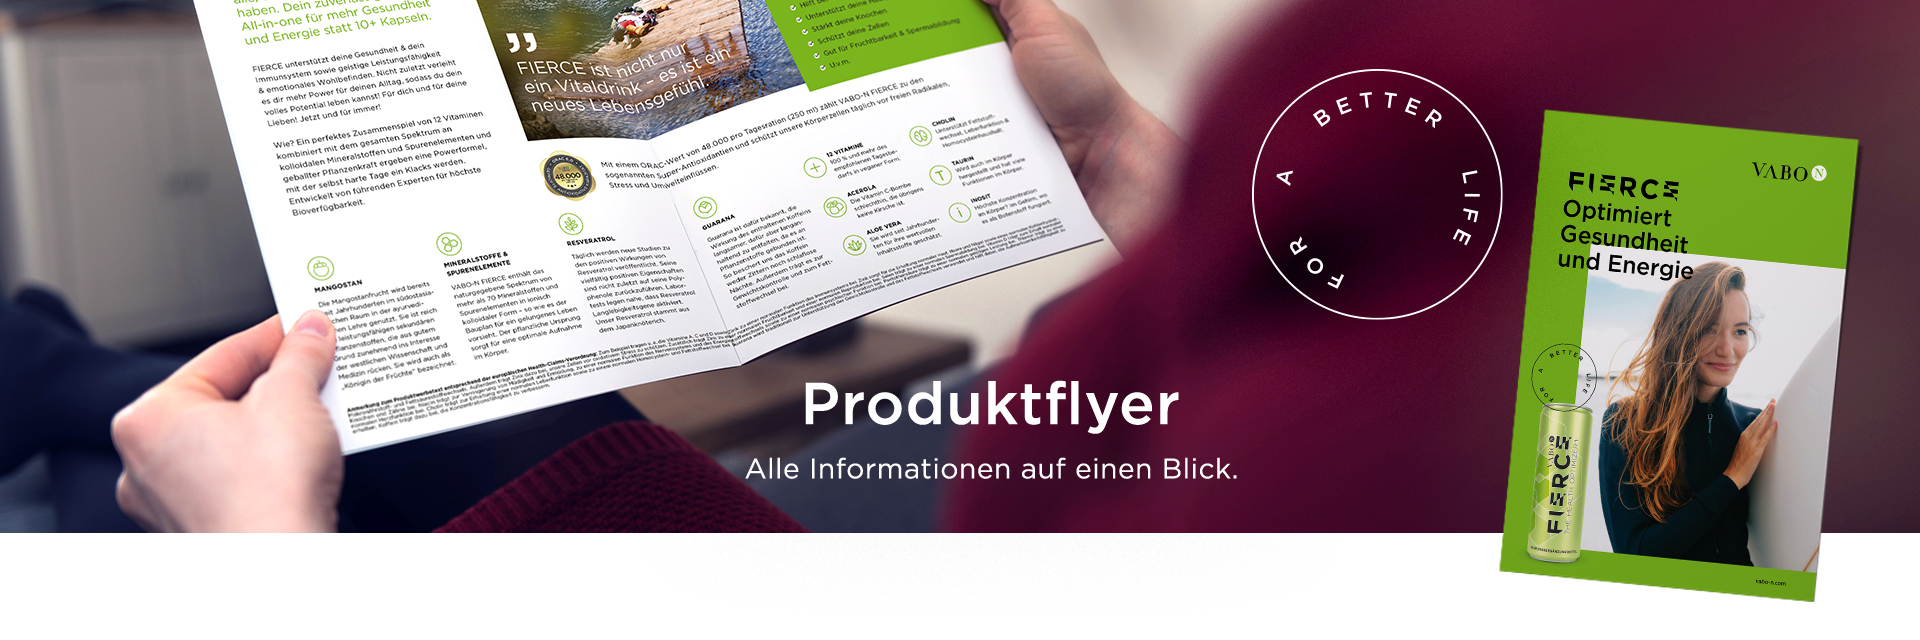 Product flyer